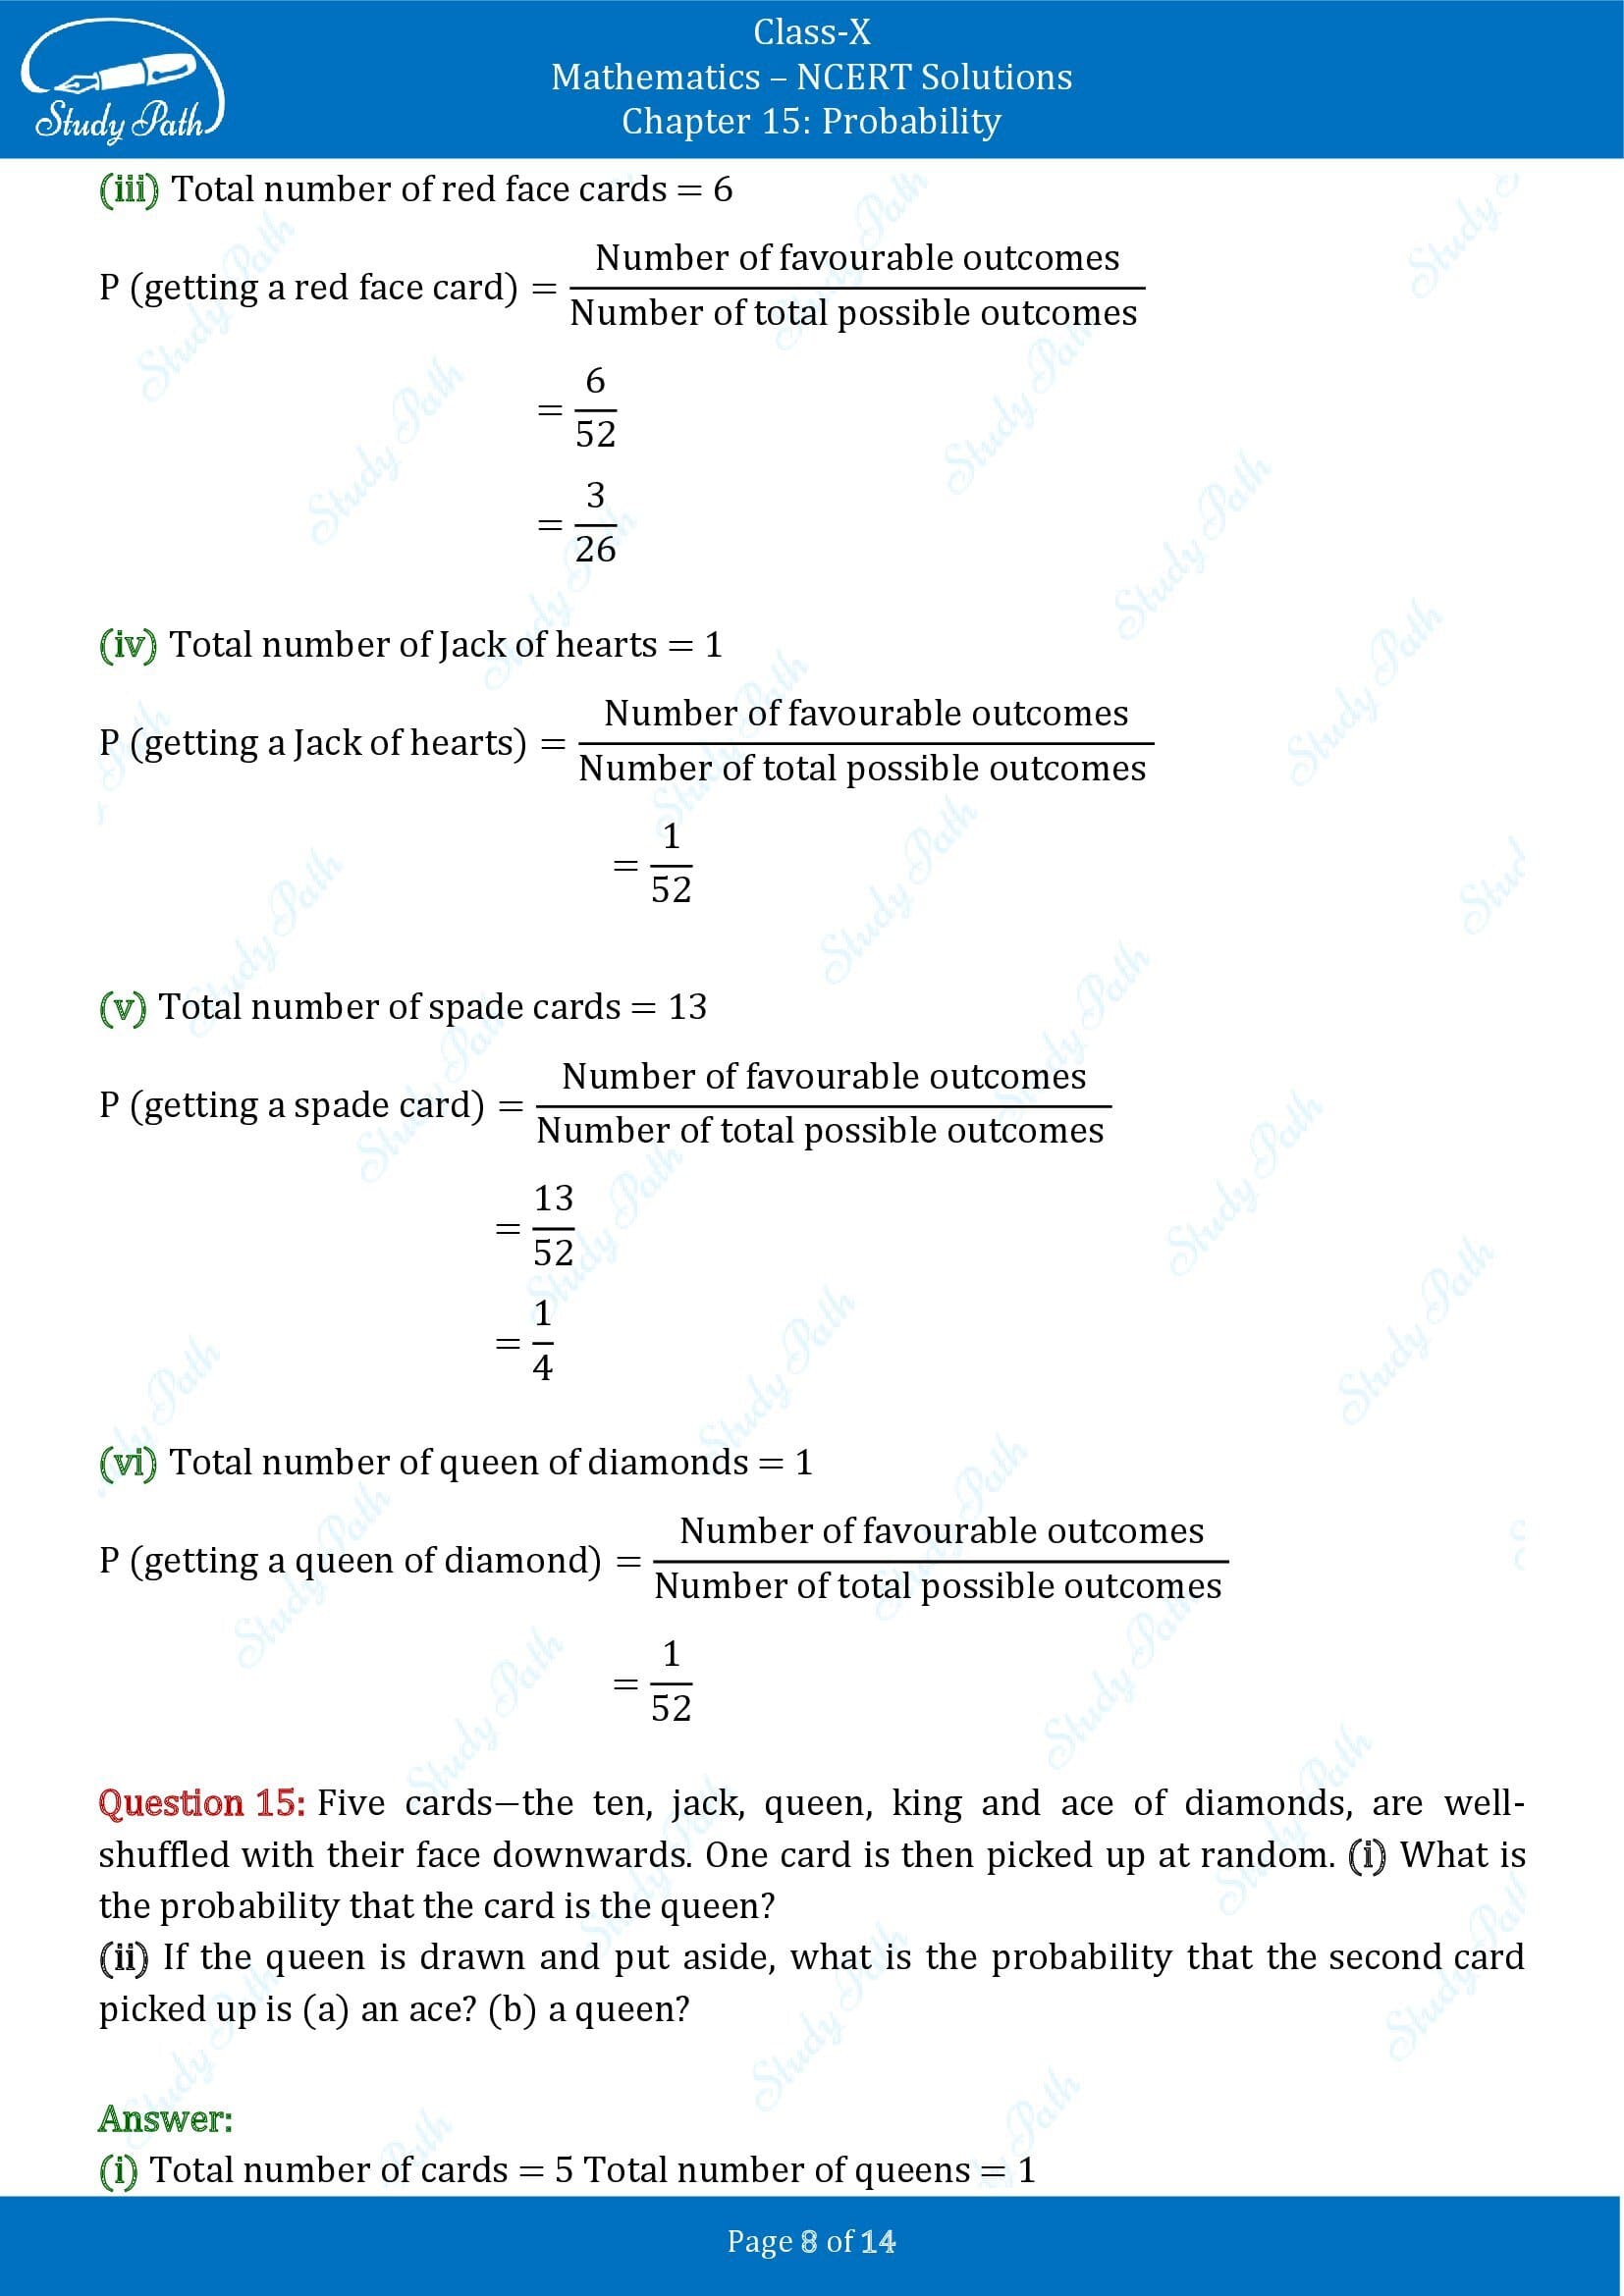 NCERT Solutions for Class 10 Maths Chapter 15 Probability Exercise 15.1 00008